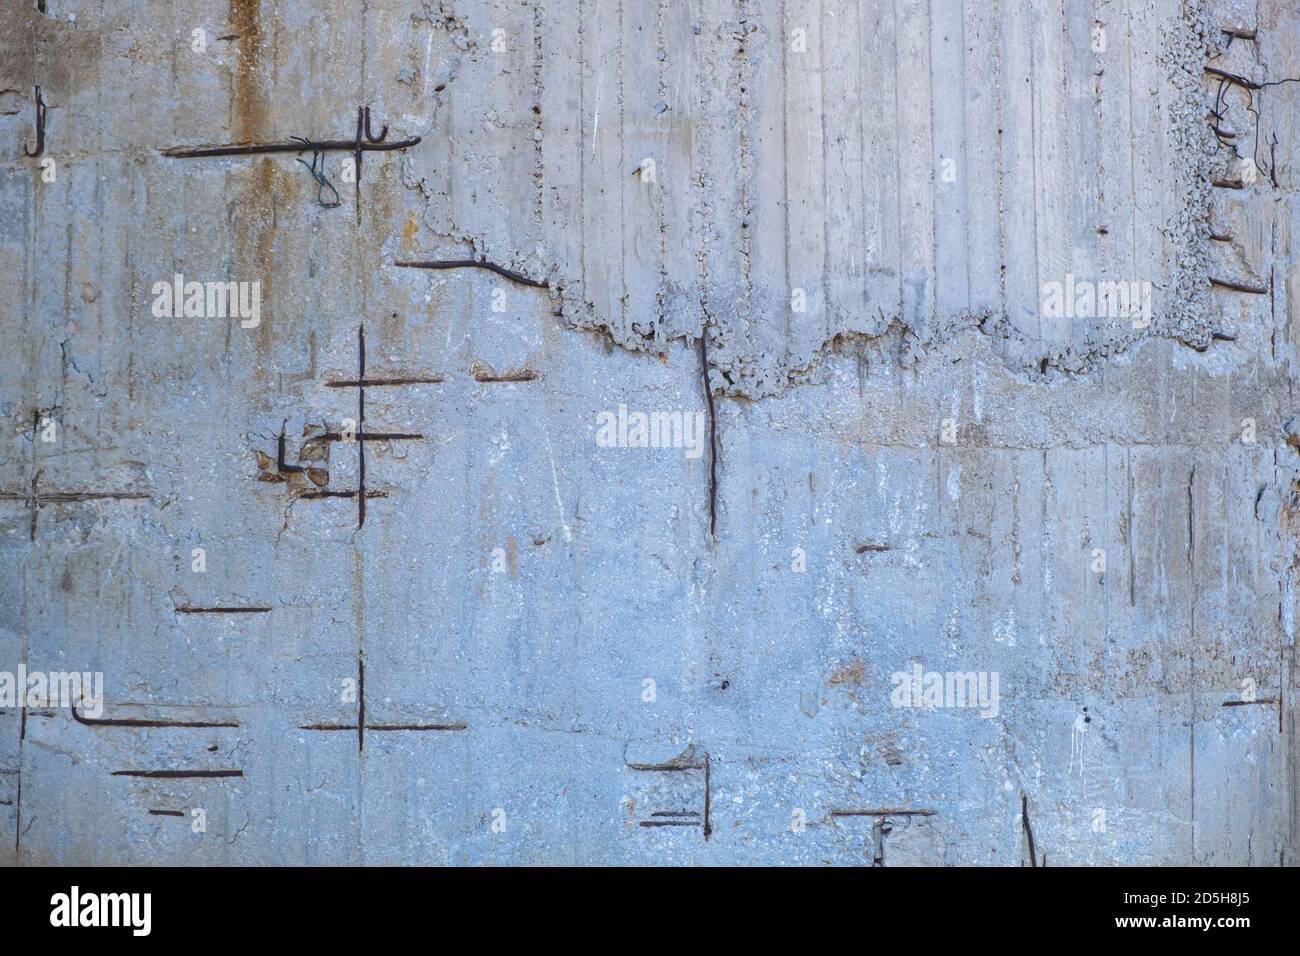 Reinforced concrete with damaged and rusty steel reinforcement. Old distressed wall texture background, steel bars and mesh visible corrosion Stock Photo